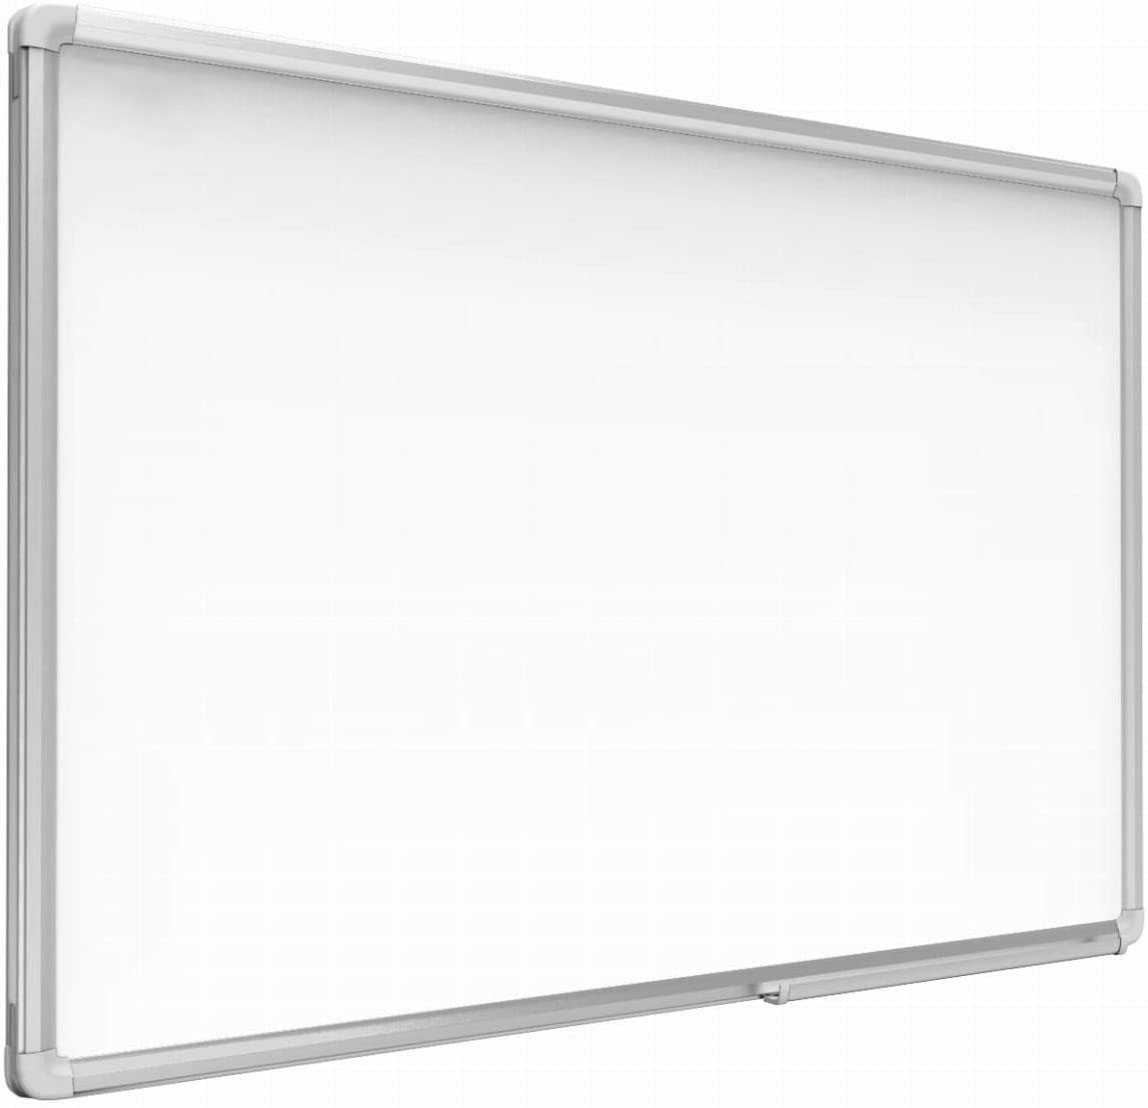 Lightweight and Sturdy ABS Corner and Steel Back Large Dry Erase White Board 48x36 Inches Honeycomb Core with Aluminum Frame Yimu Magnetic Whiteboard 90x120cm 